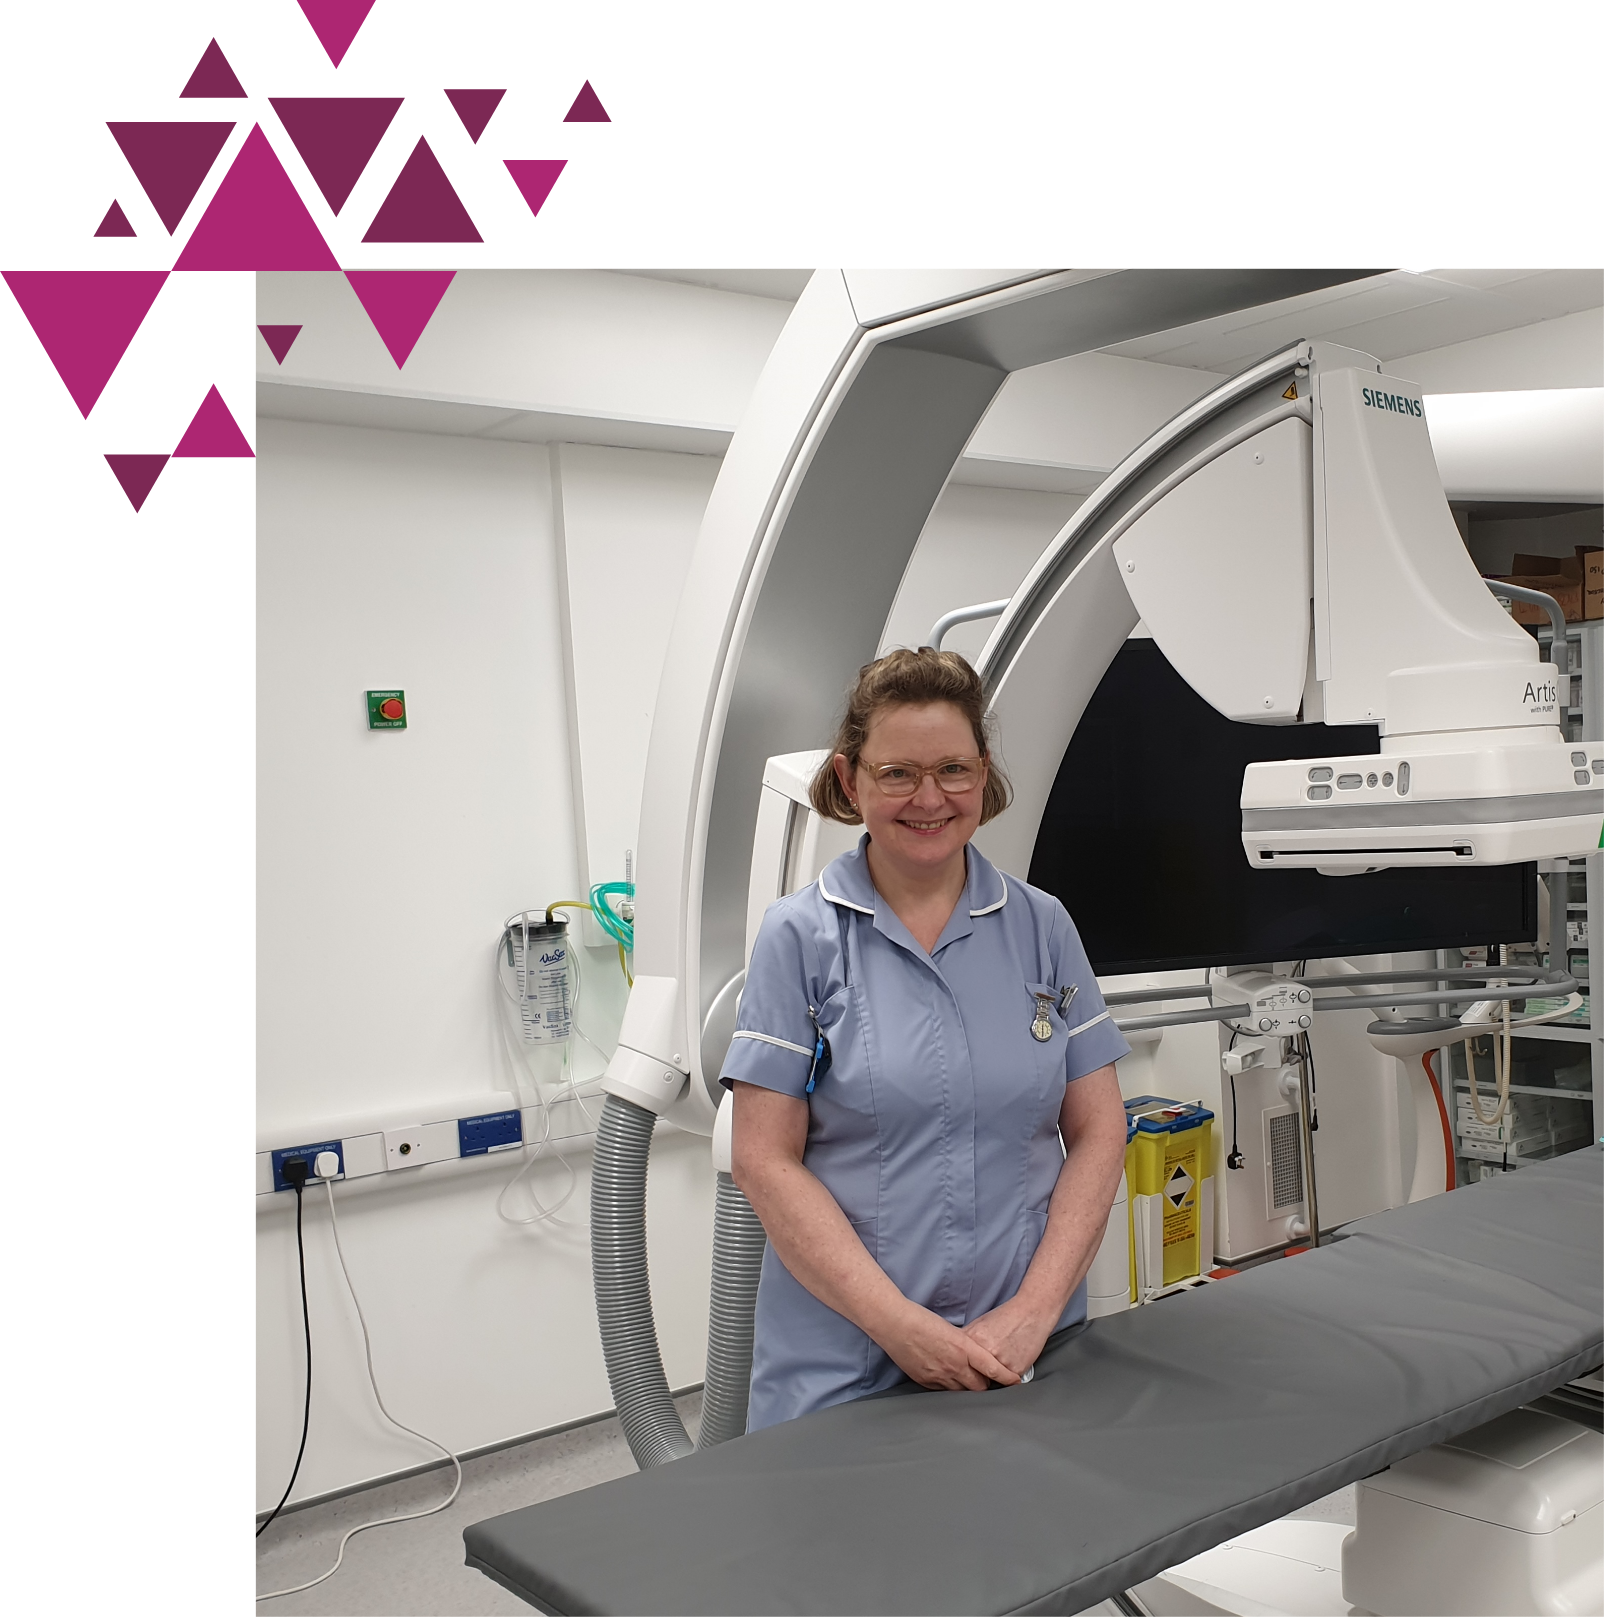 A female healthcare professional in blue scrubs stands smiling in front of an advanced imaging machine in a clinical setting, with purple geometric shapes in the corner.